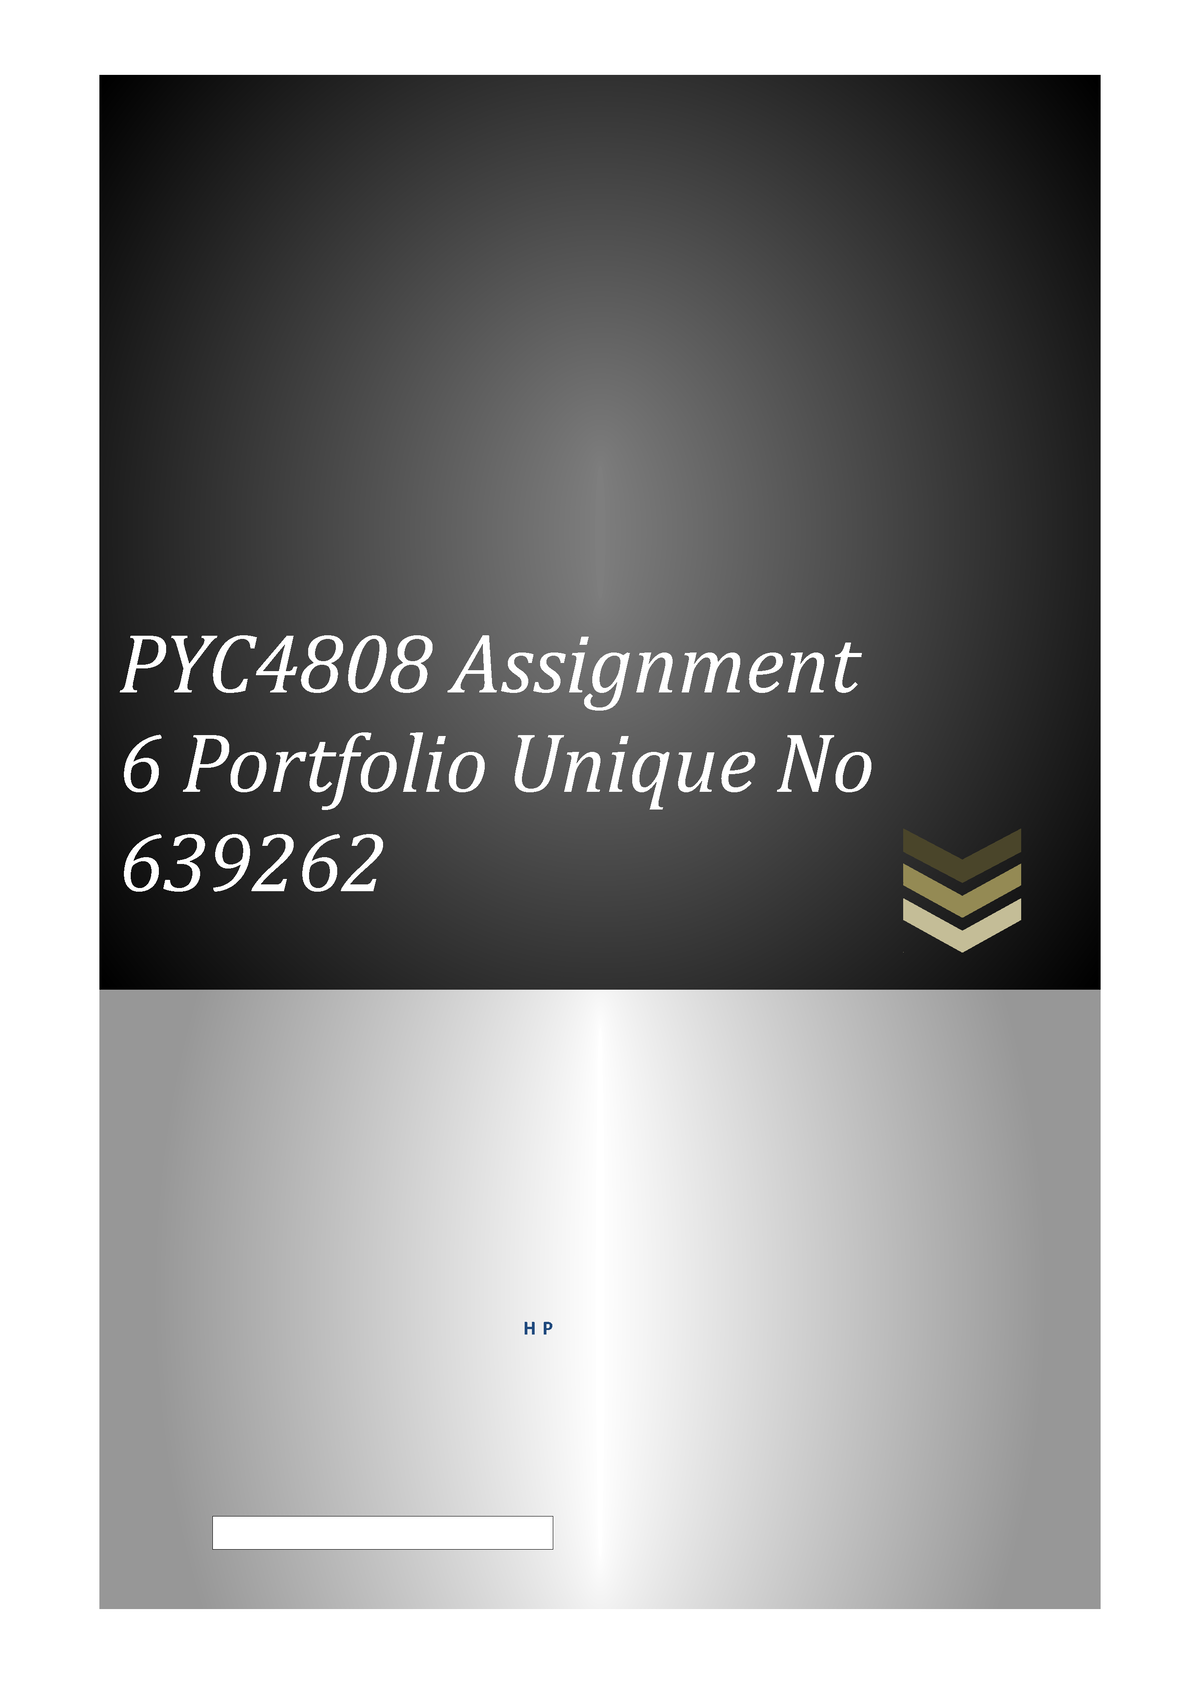 pyc4808 assignment 5 multiple choice